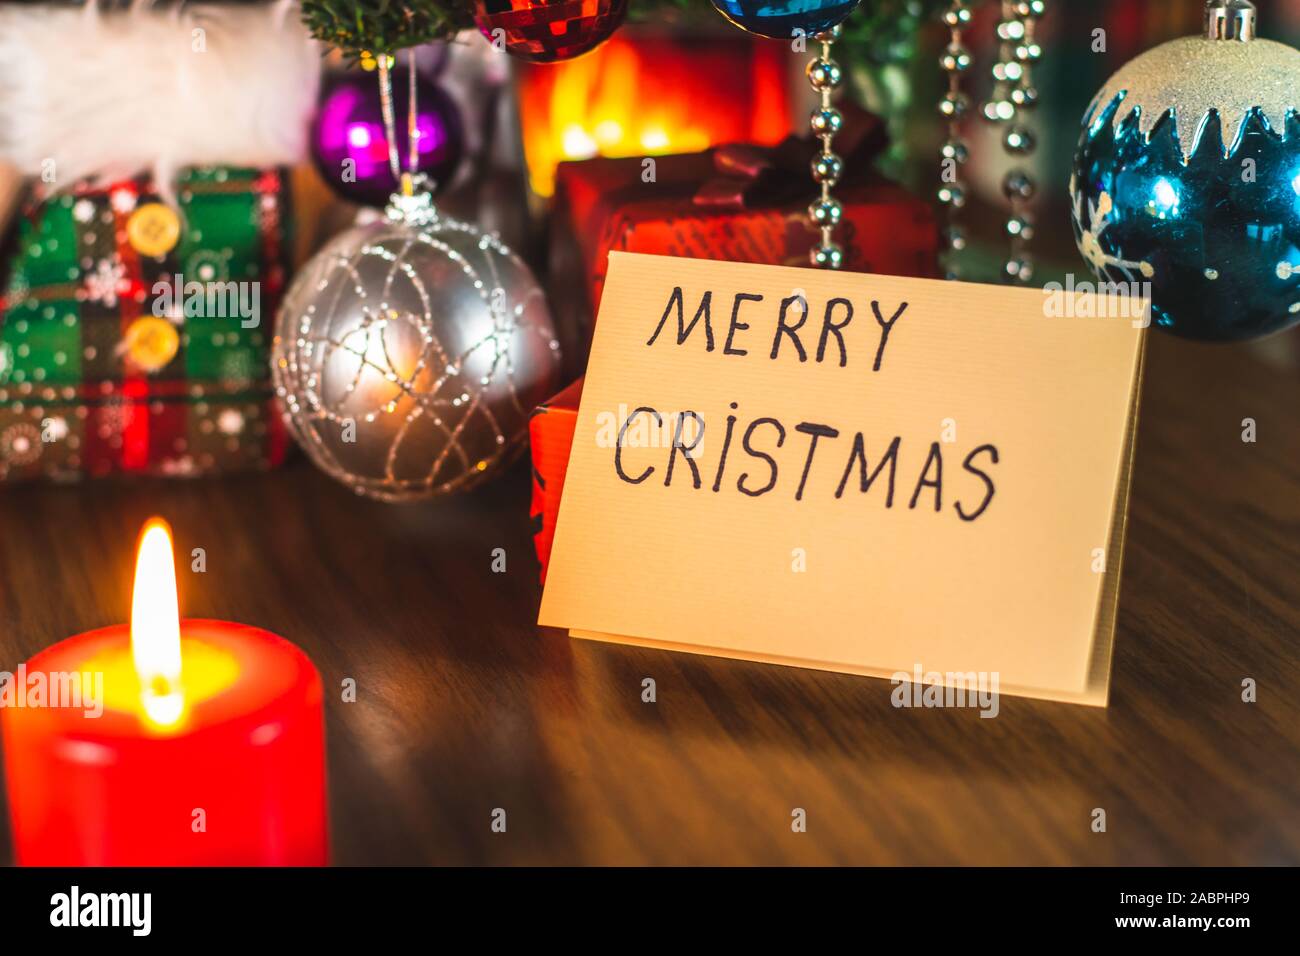 Merry Christmas written on a greeting card under a Christmas tree with decorations and ornaments. Festive celebration. Stock Photo